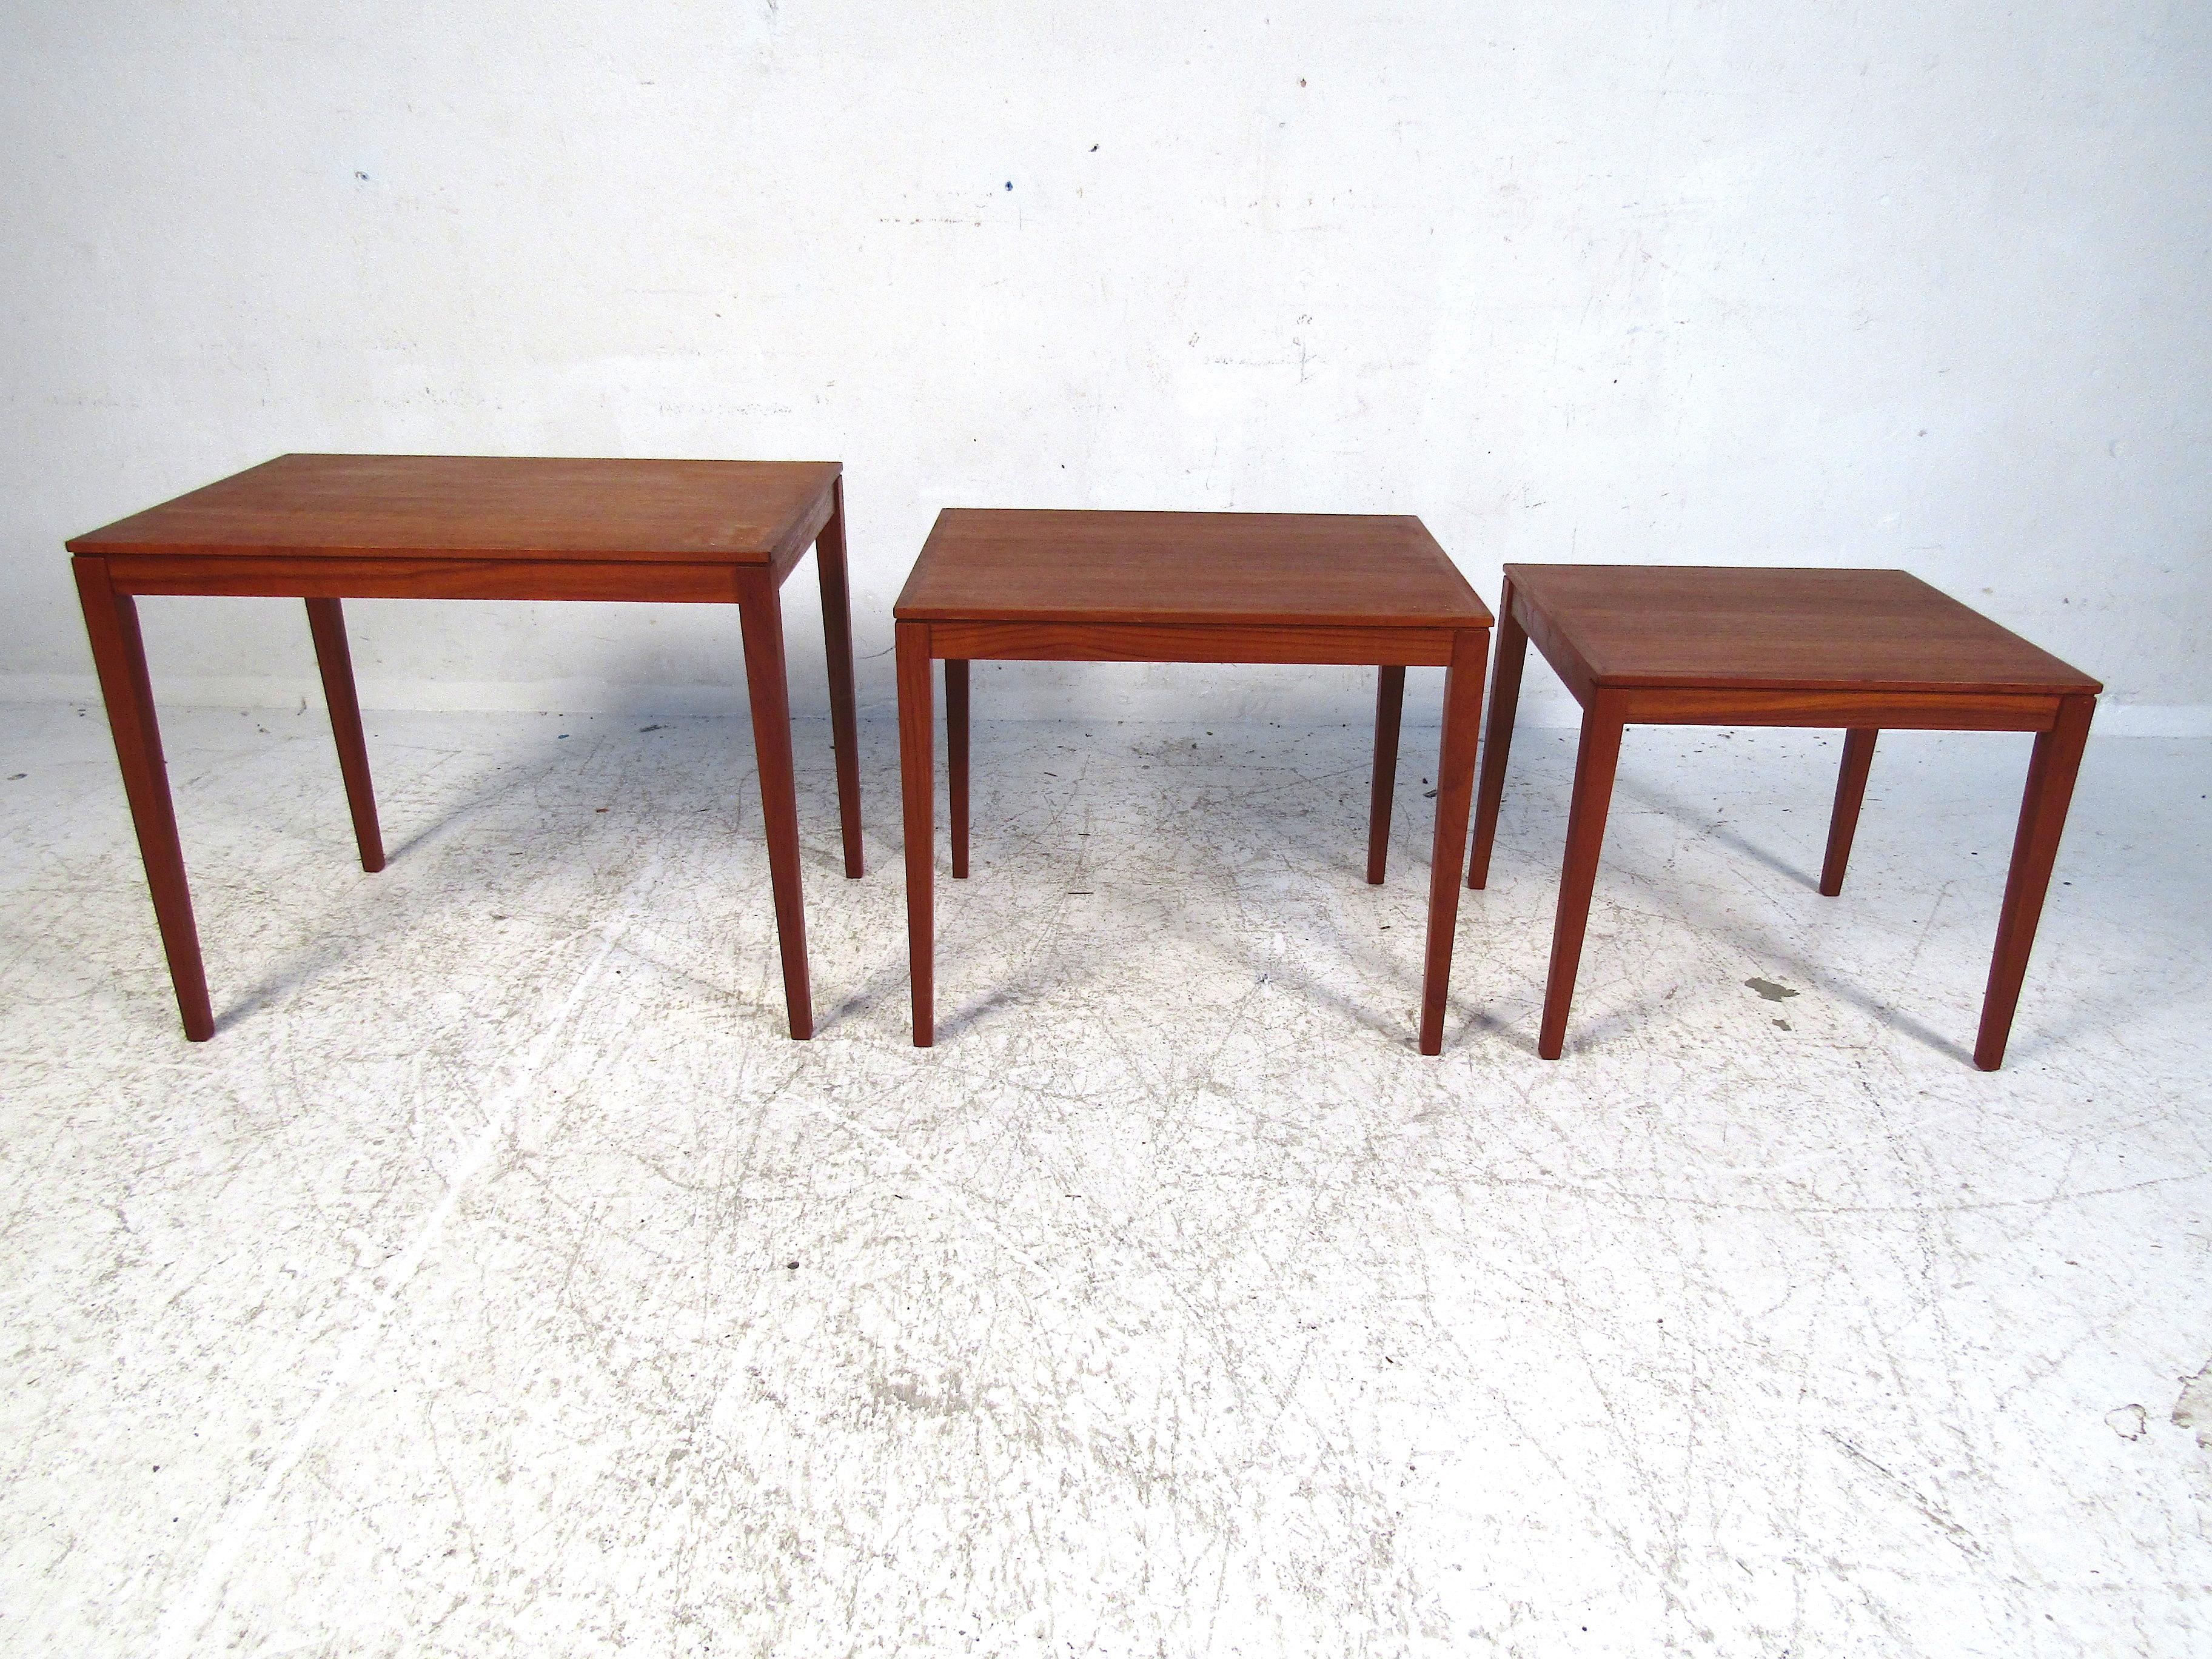 This elegant set of Danish nesting tables by Bent Silberg is perfect for any sitting room or accent room. With Minimalist construction, this set adds a bold sense of style without overpowering the space. Made to last these tables will be a beautiful